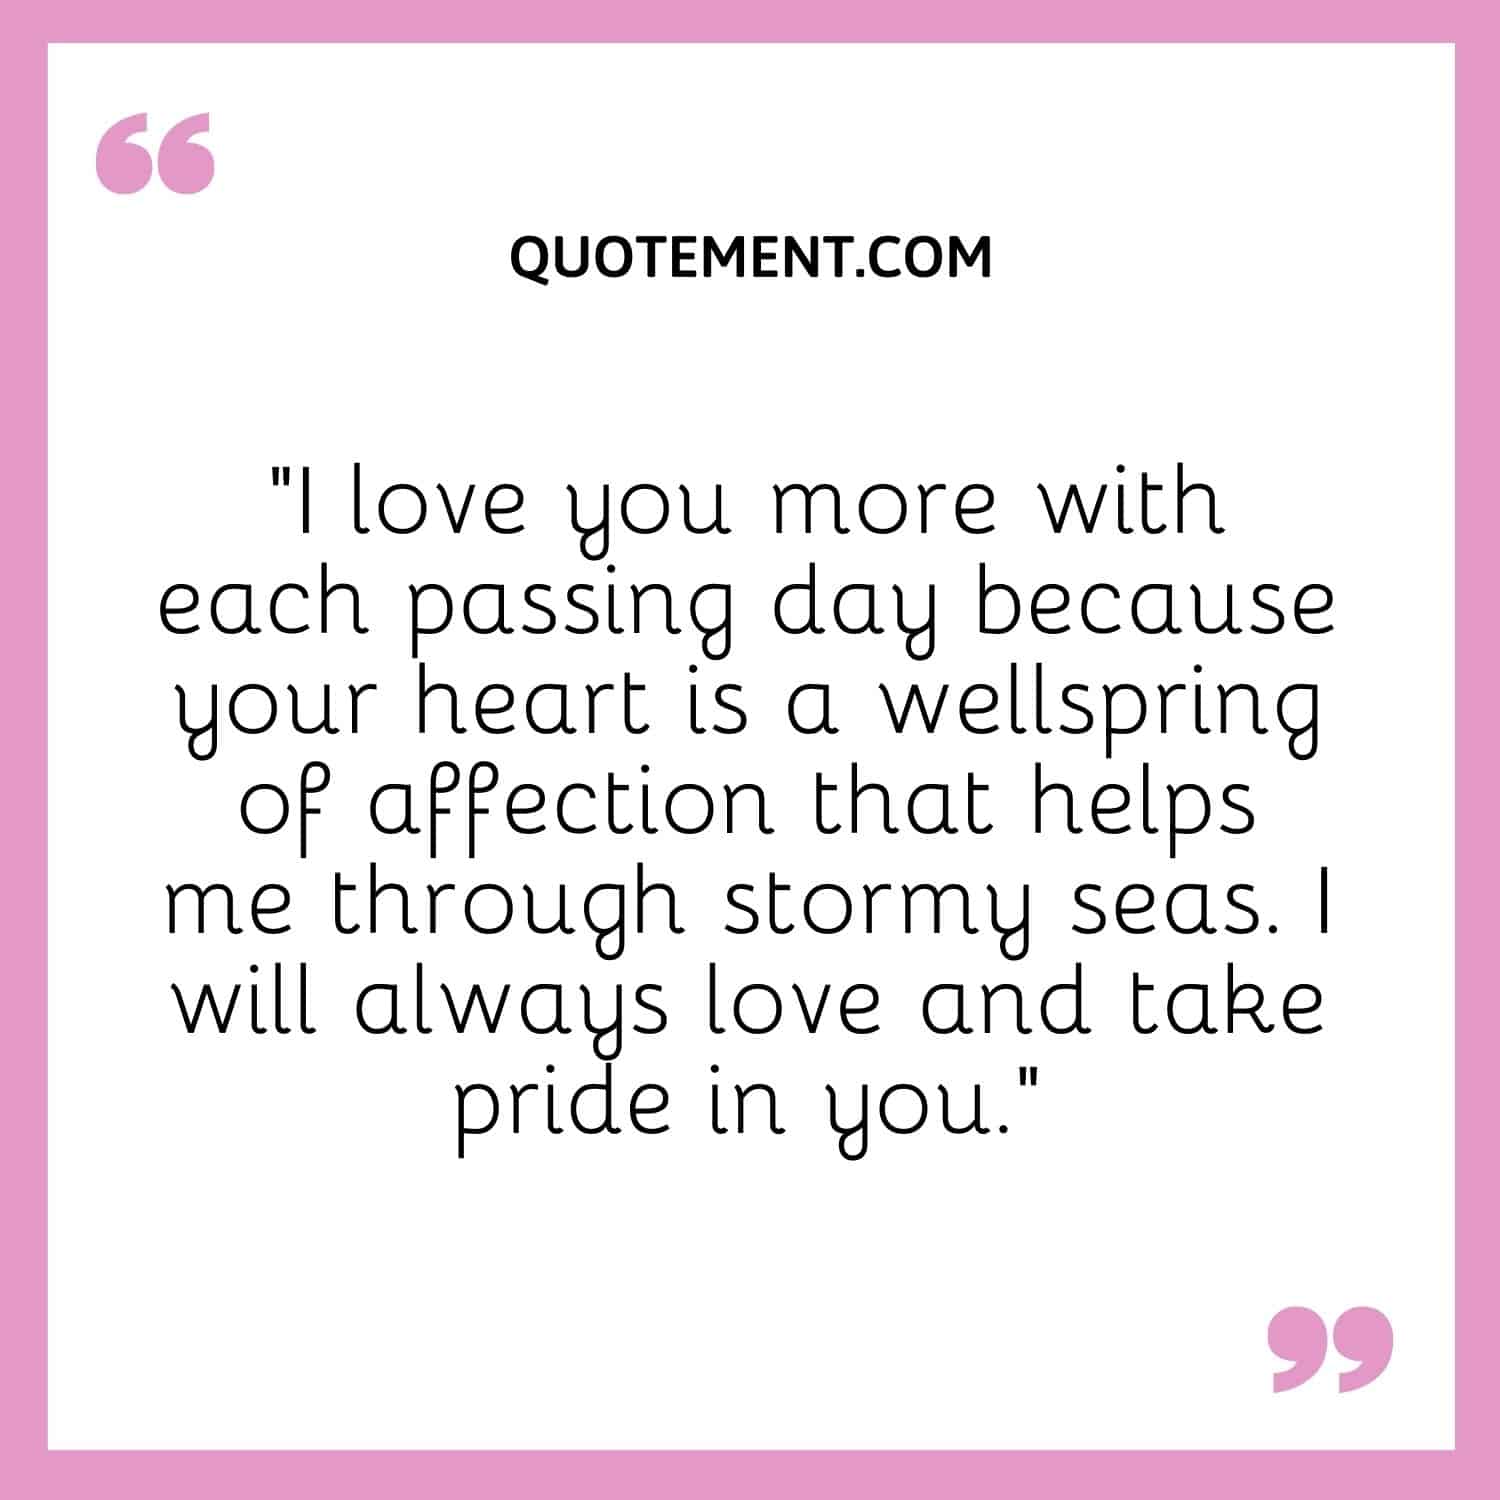 “I love you more with each passing day because your heart is a wellspring of affection that helps me through stormy seas. I will always love and take pride in you.”